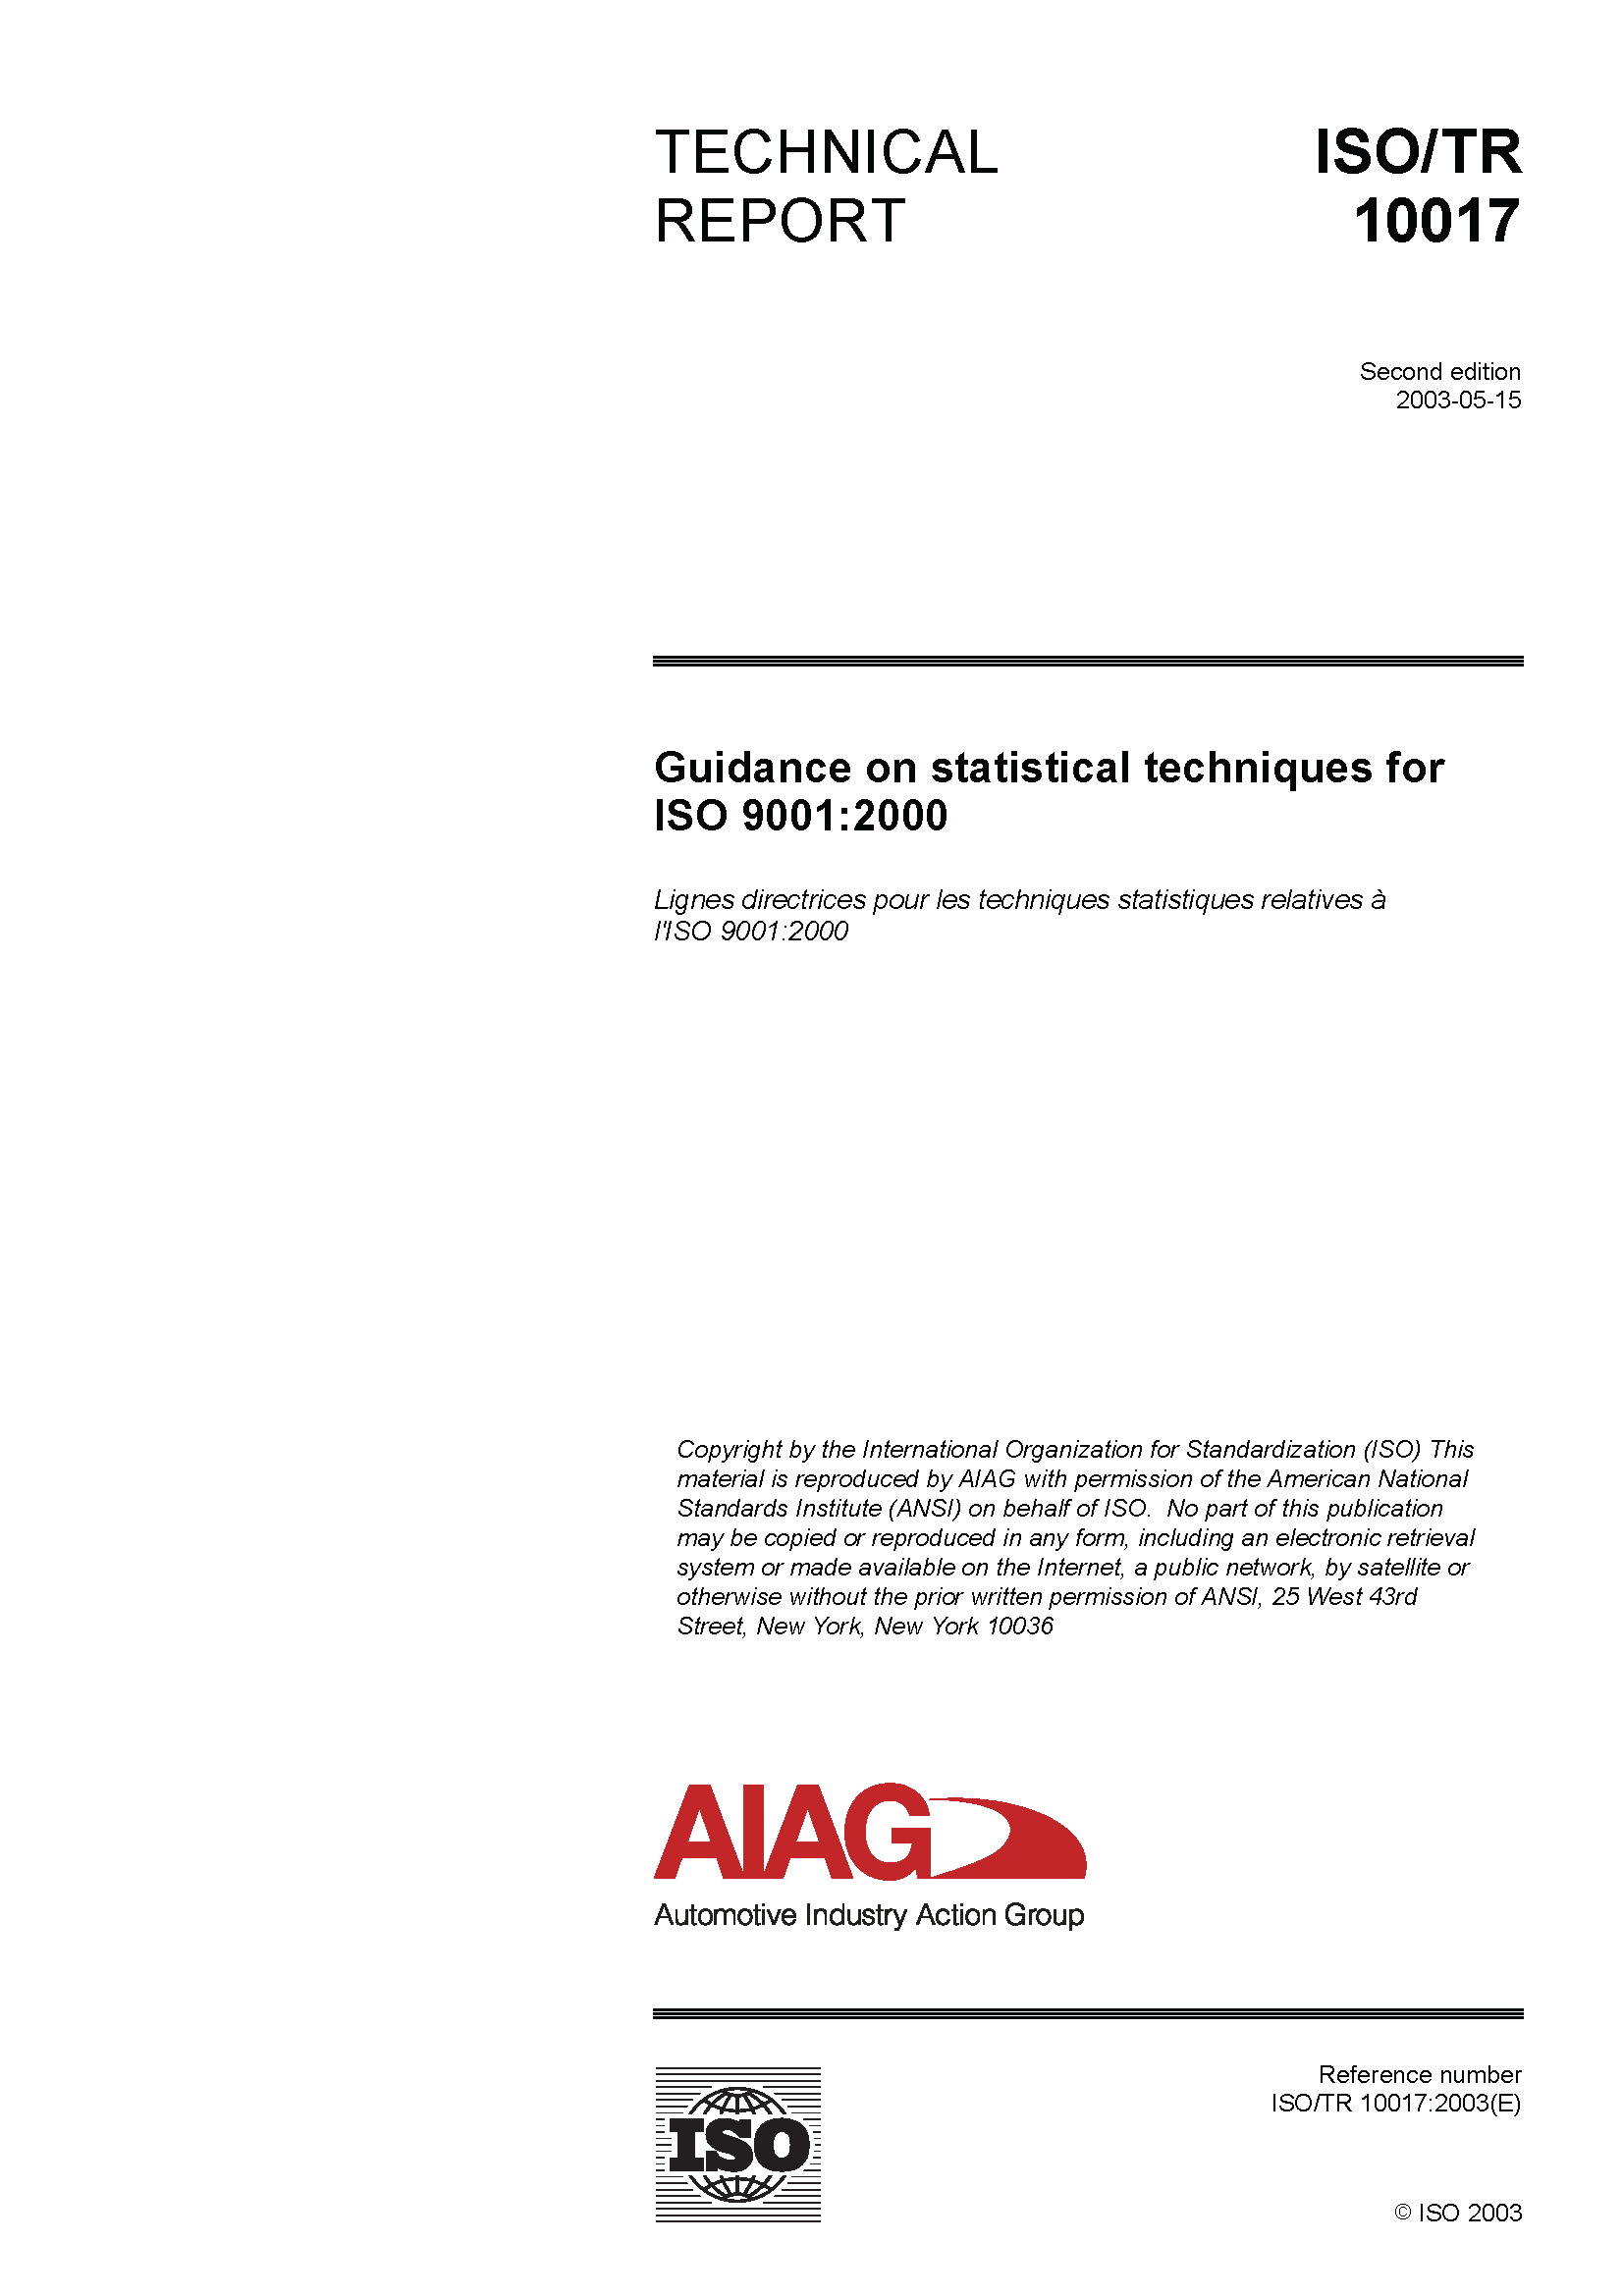 Publikace AIAG Guidance on Statistical Techniques for ISO 9001:2000 1.5.2003 náhled